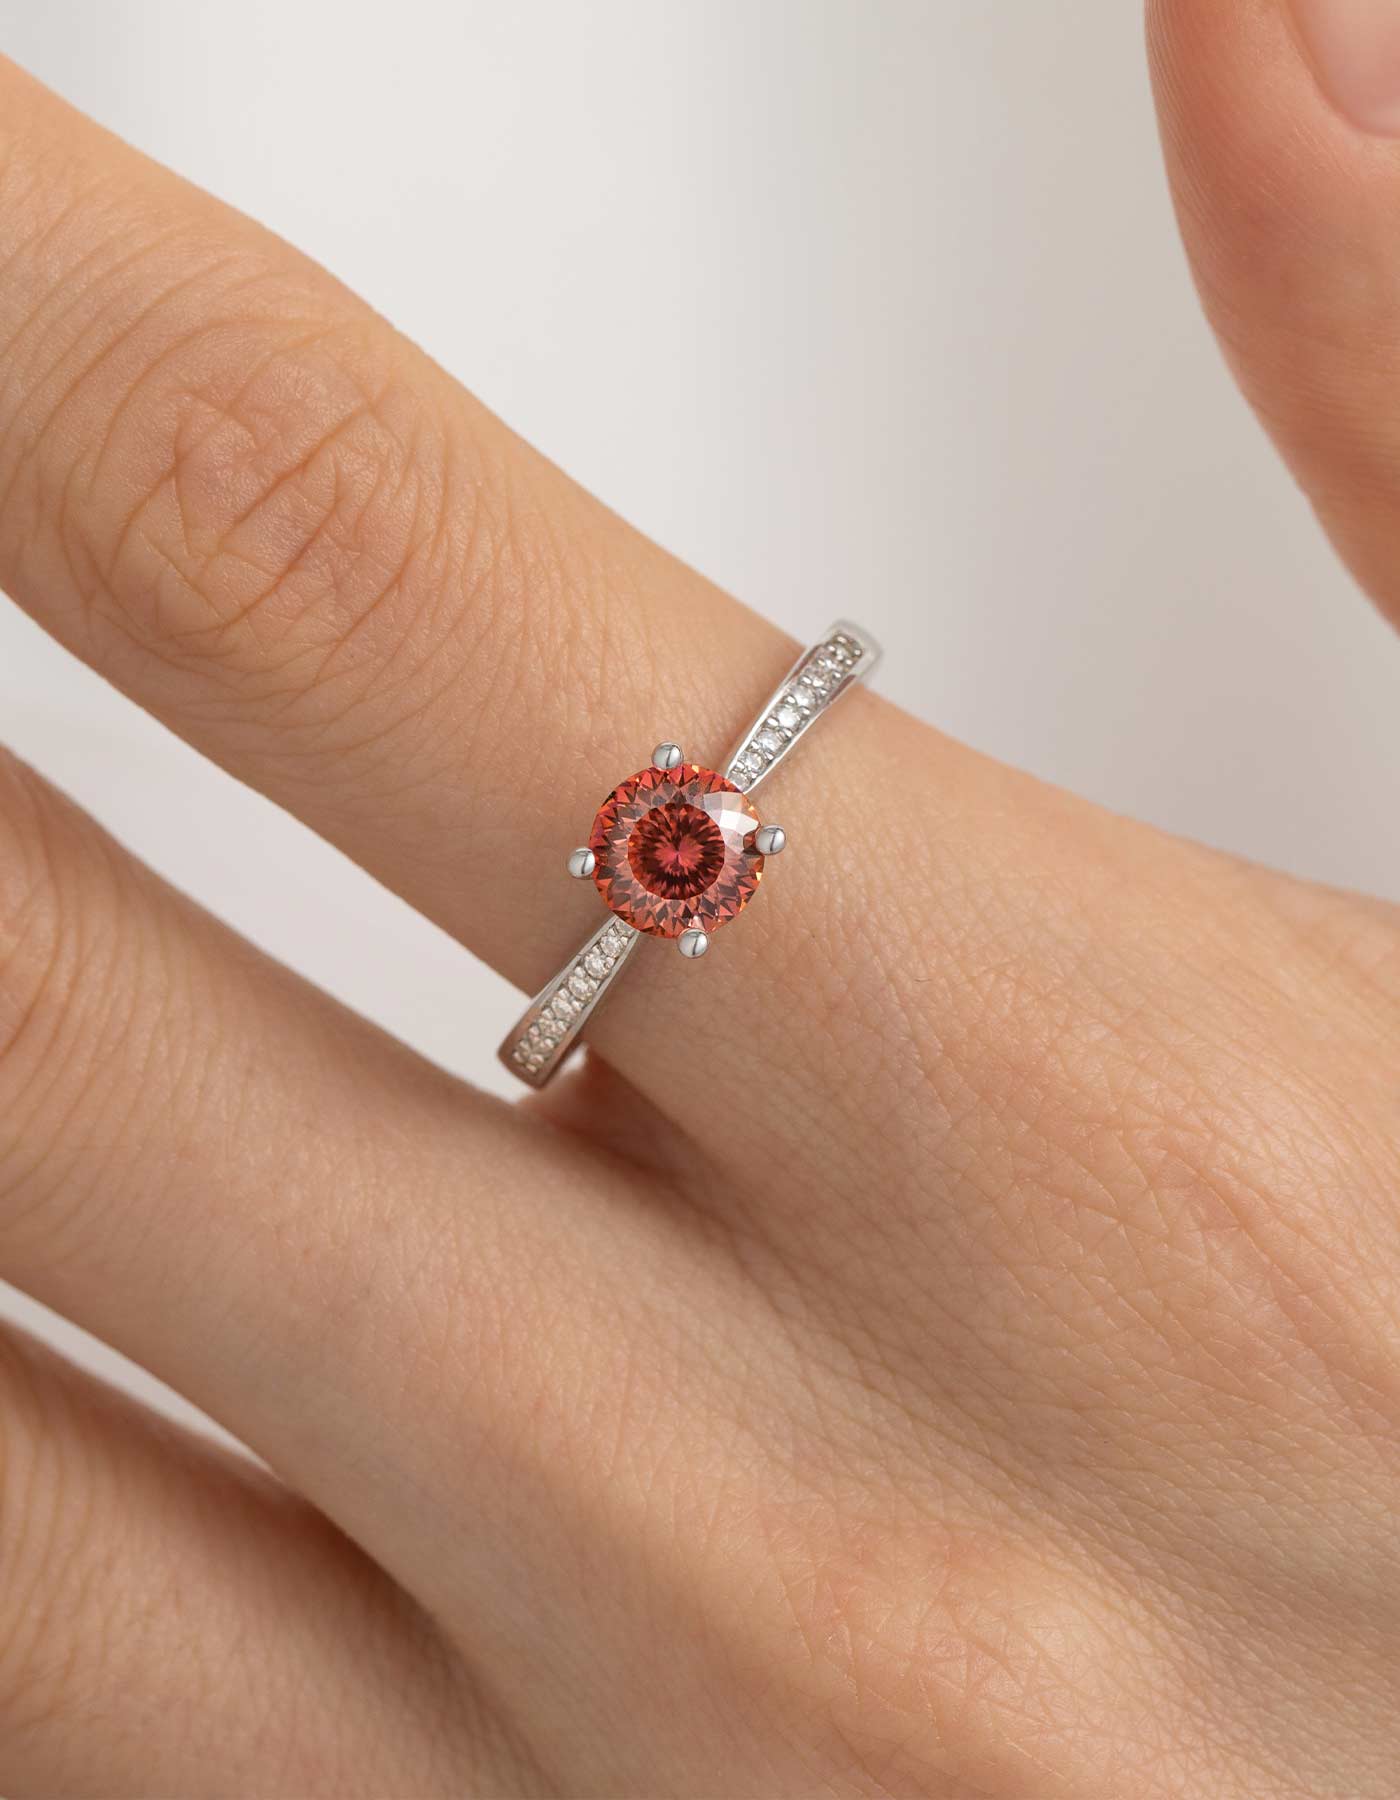 Birthstone Rings for Wome